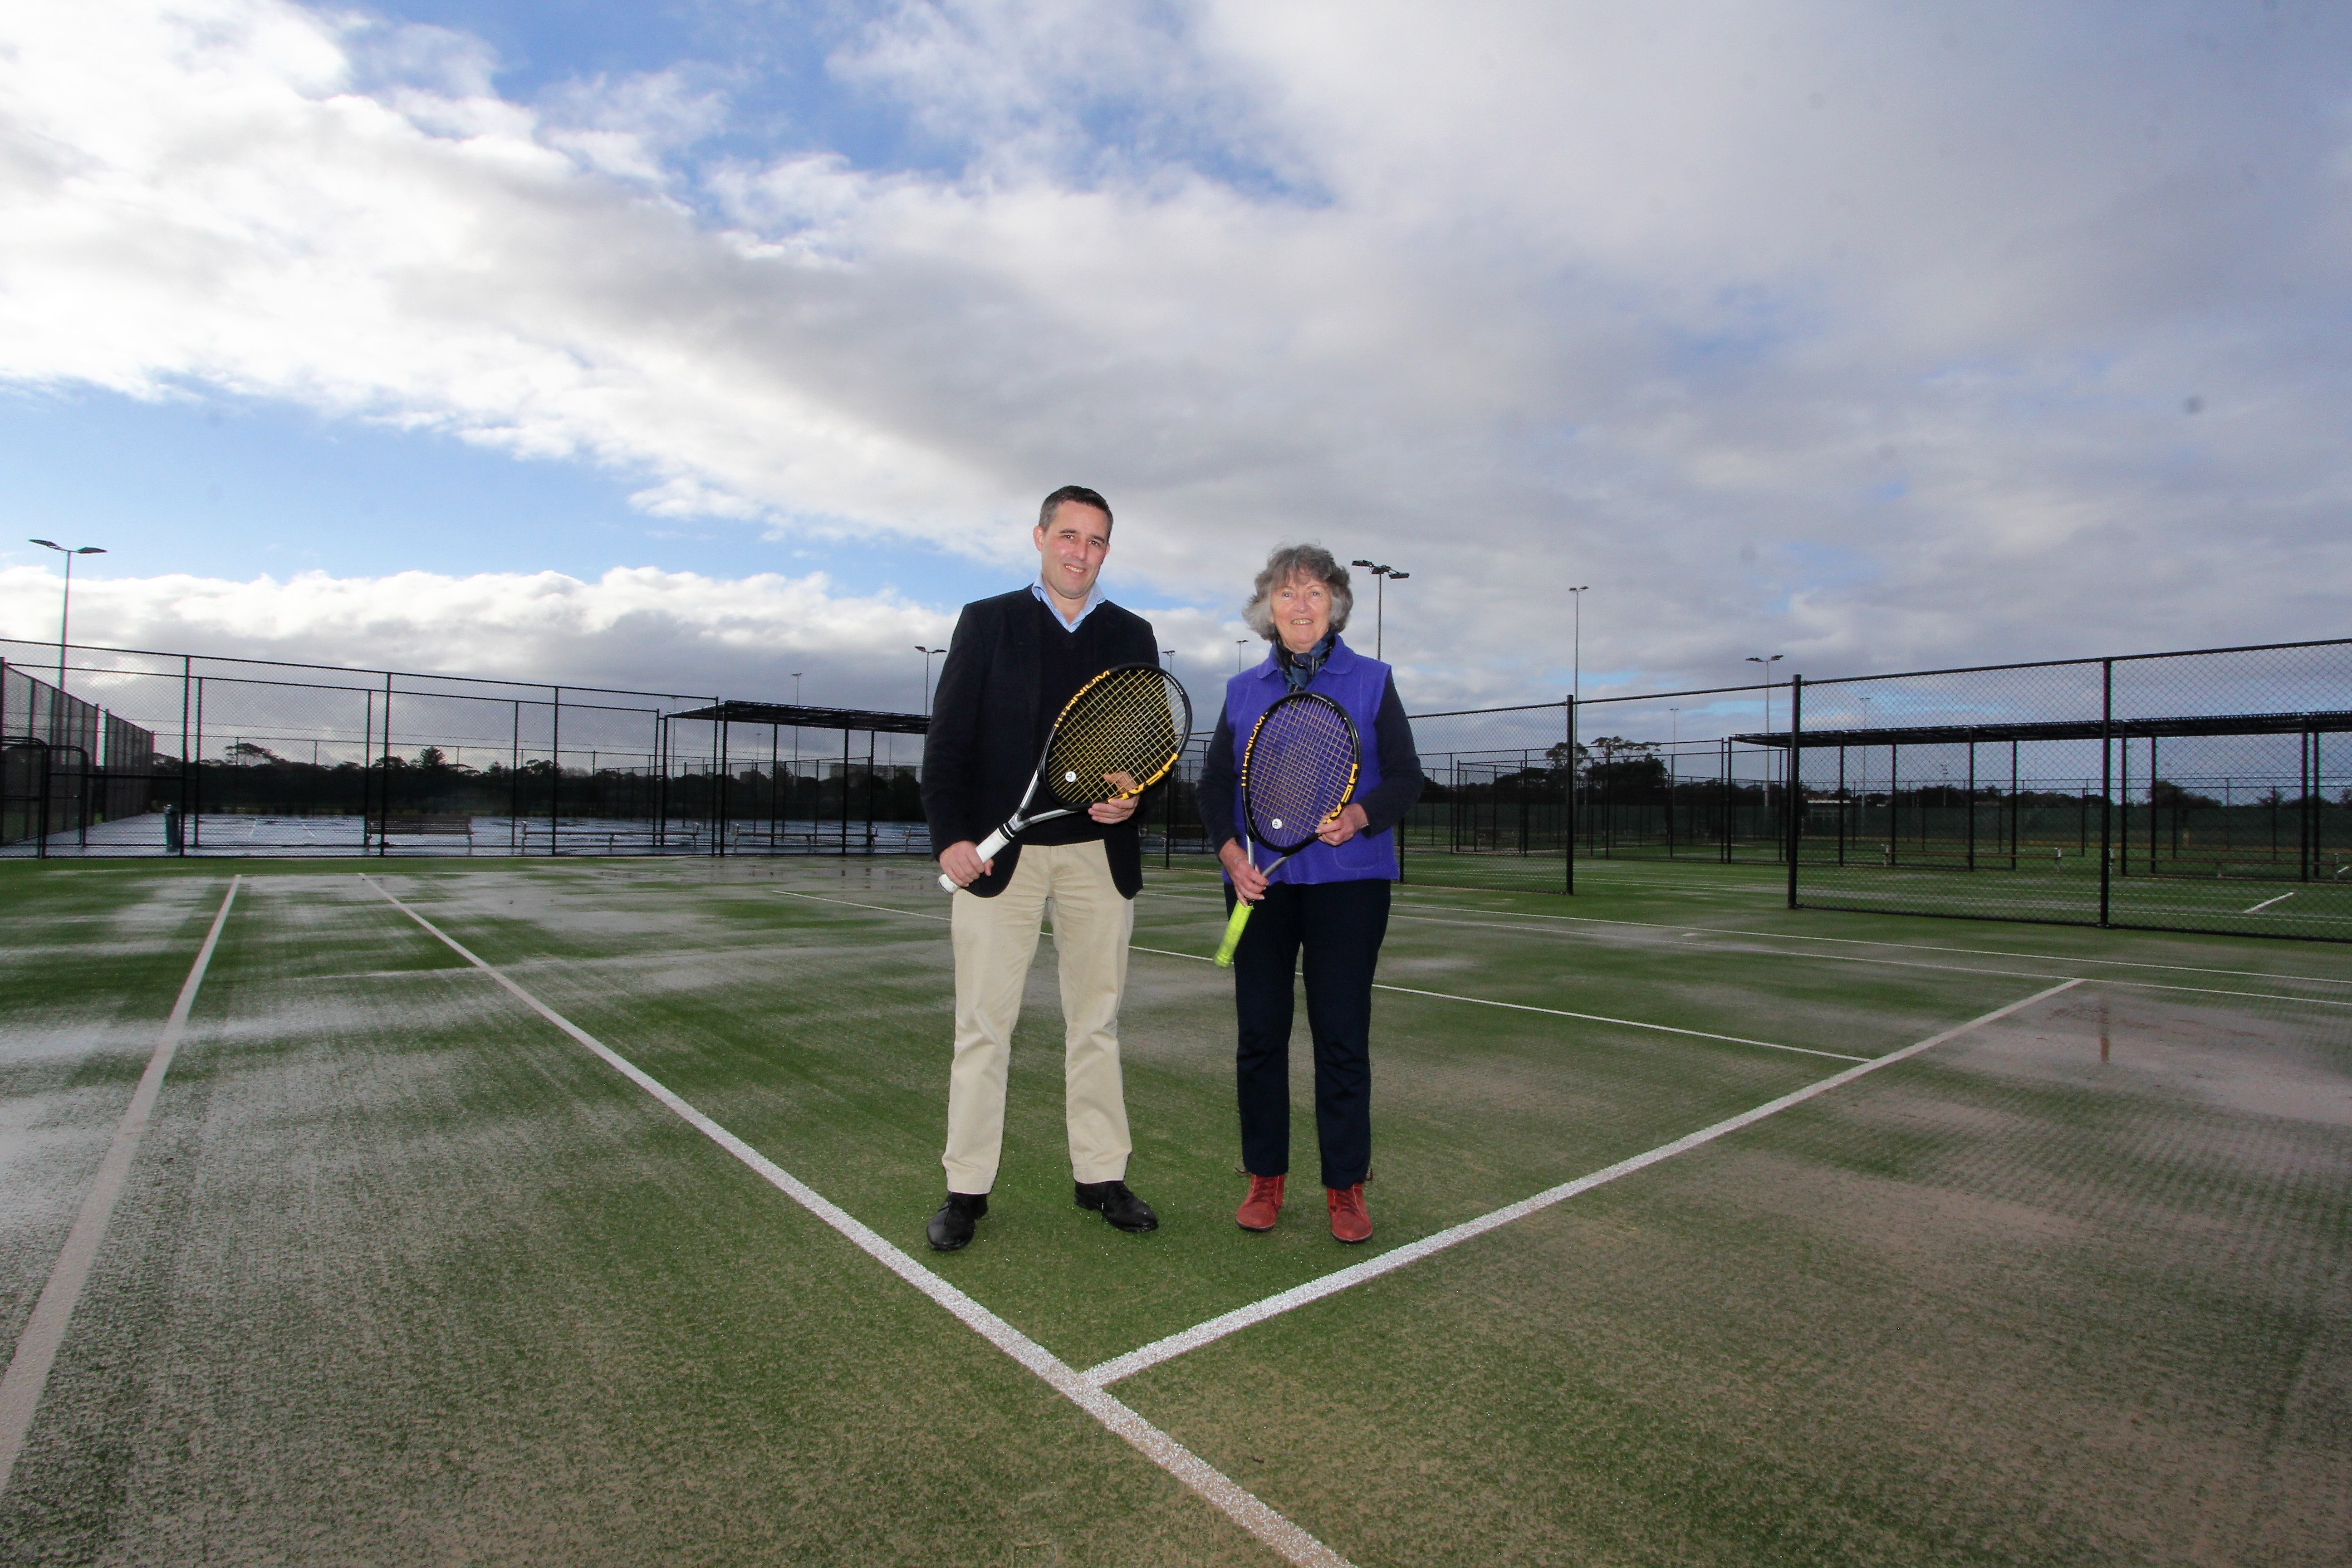 Mayor Kathy Neilson with the new operator of the Tennis Centre Richard Price, CEO of Sydney Sports Management Group.  